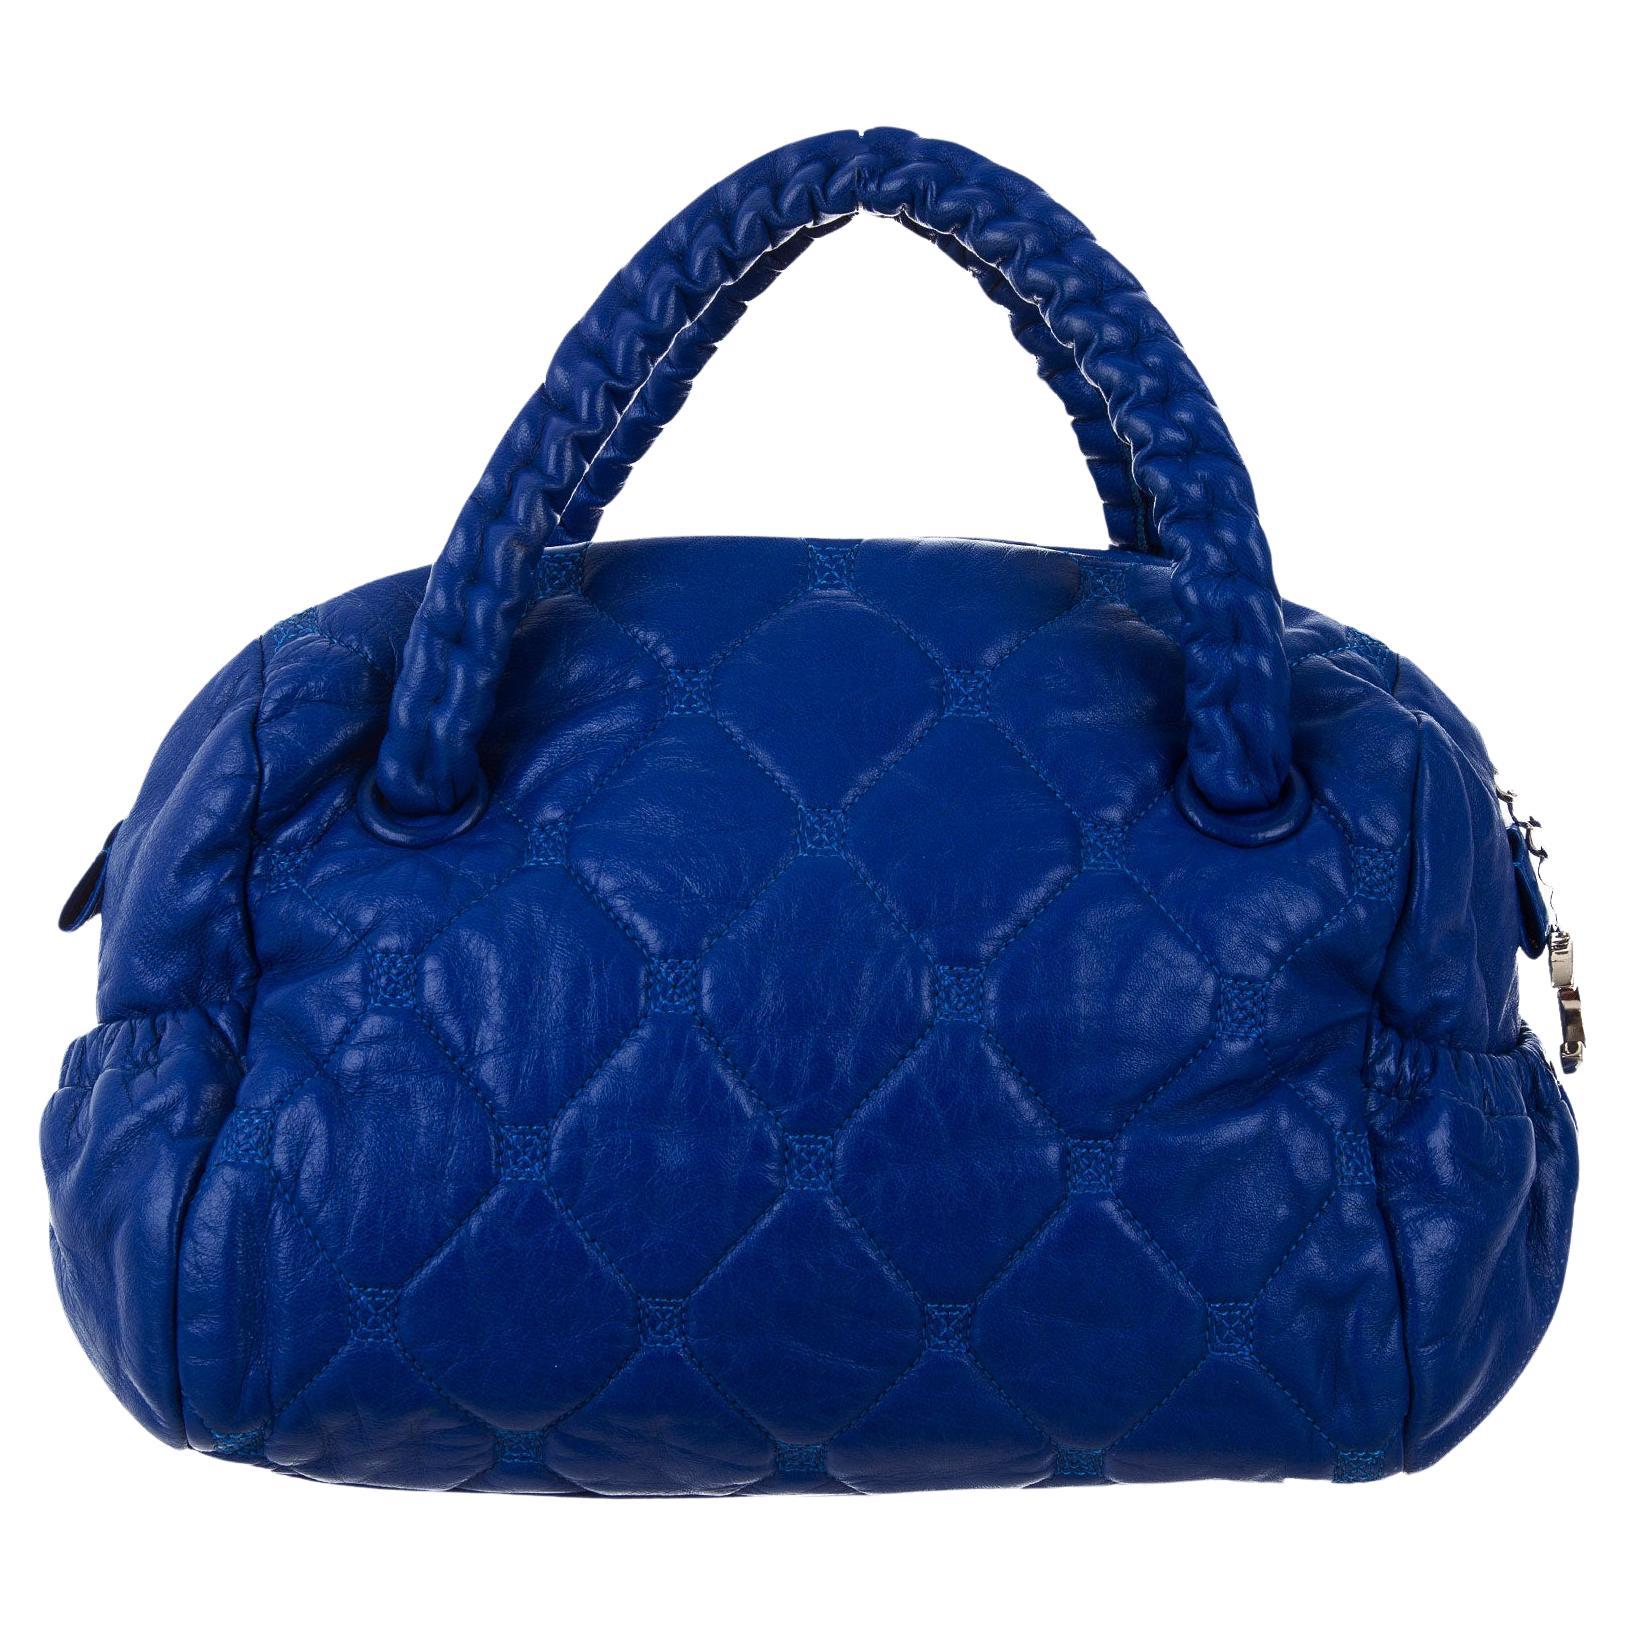 Chanel 2008 Royal Blue Top Handle Small Bowler Tote Stitched Lambskin Bag  en vente